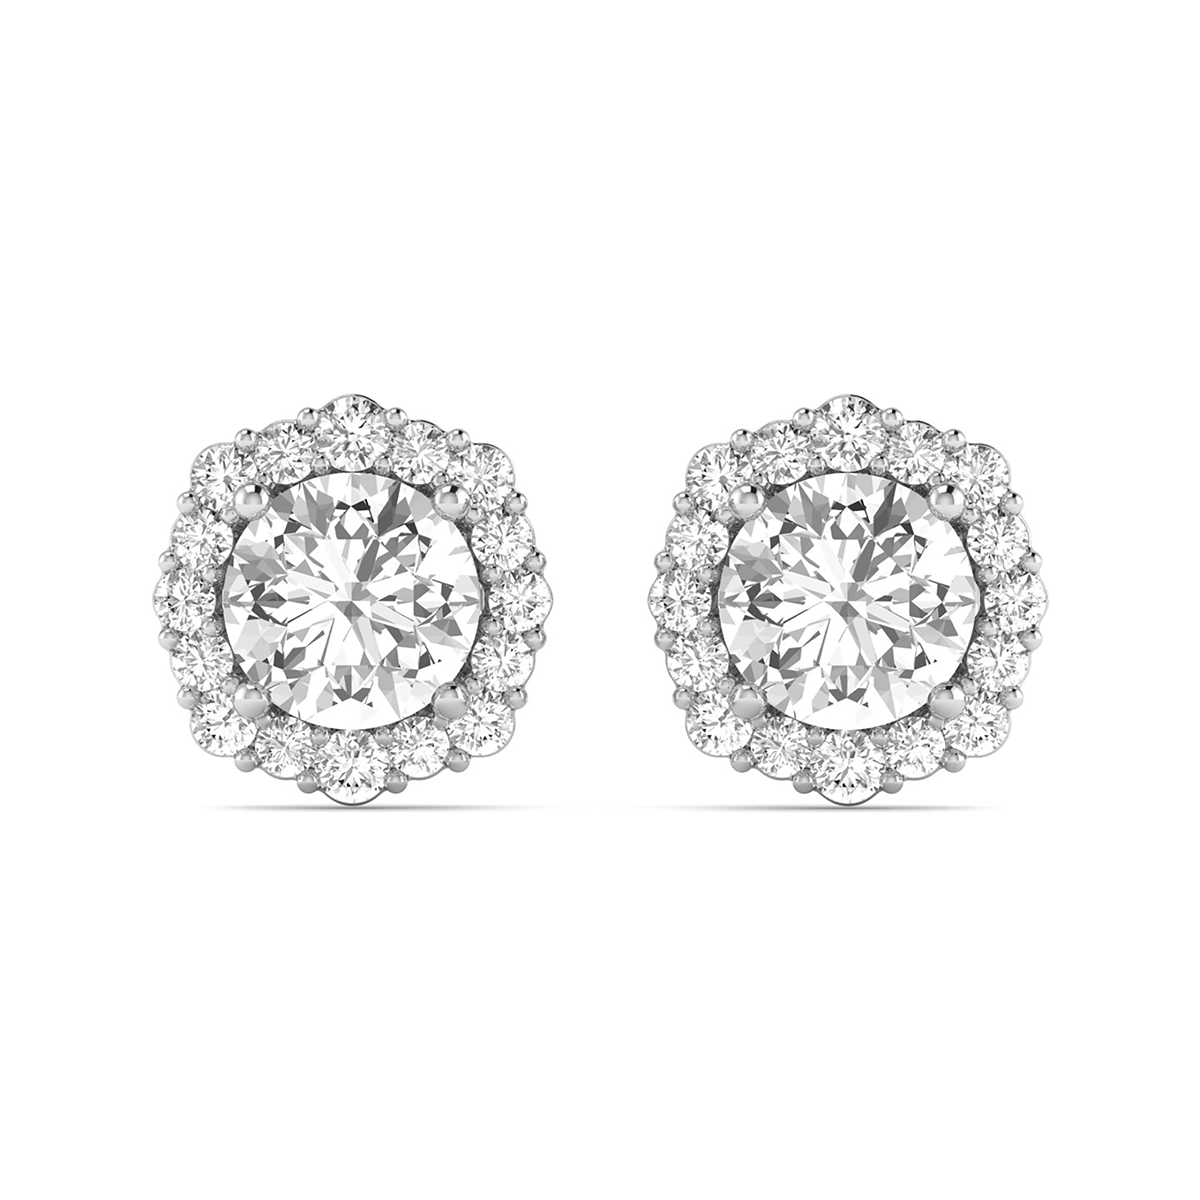 Image of 1 1/5 Carat TW Floral Halo Diamond Stud Earrings 14K White Gold